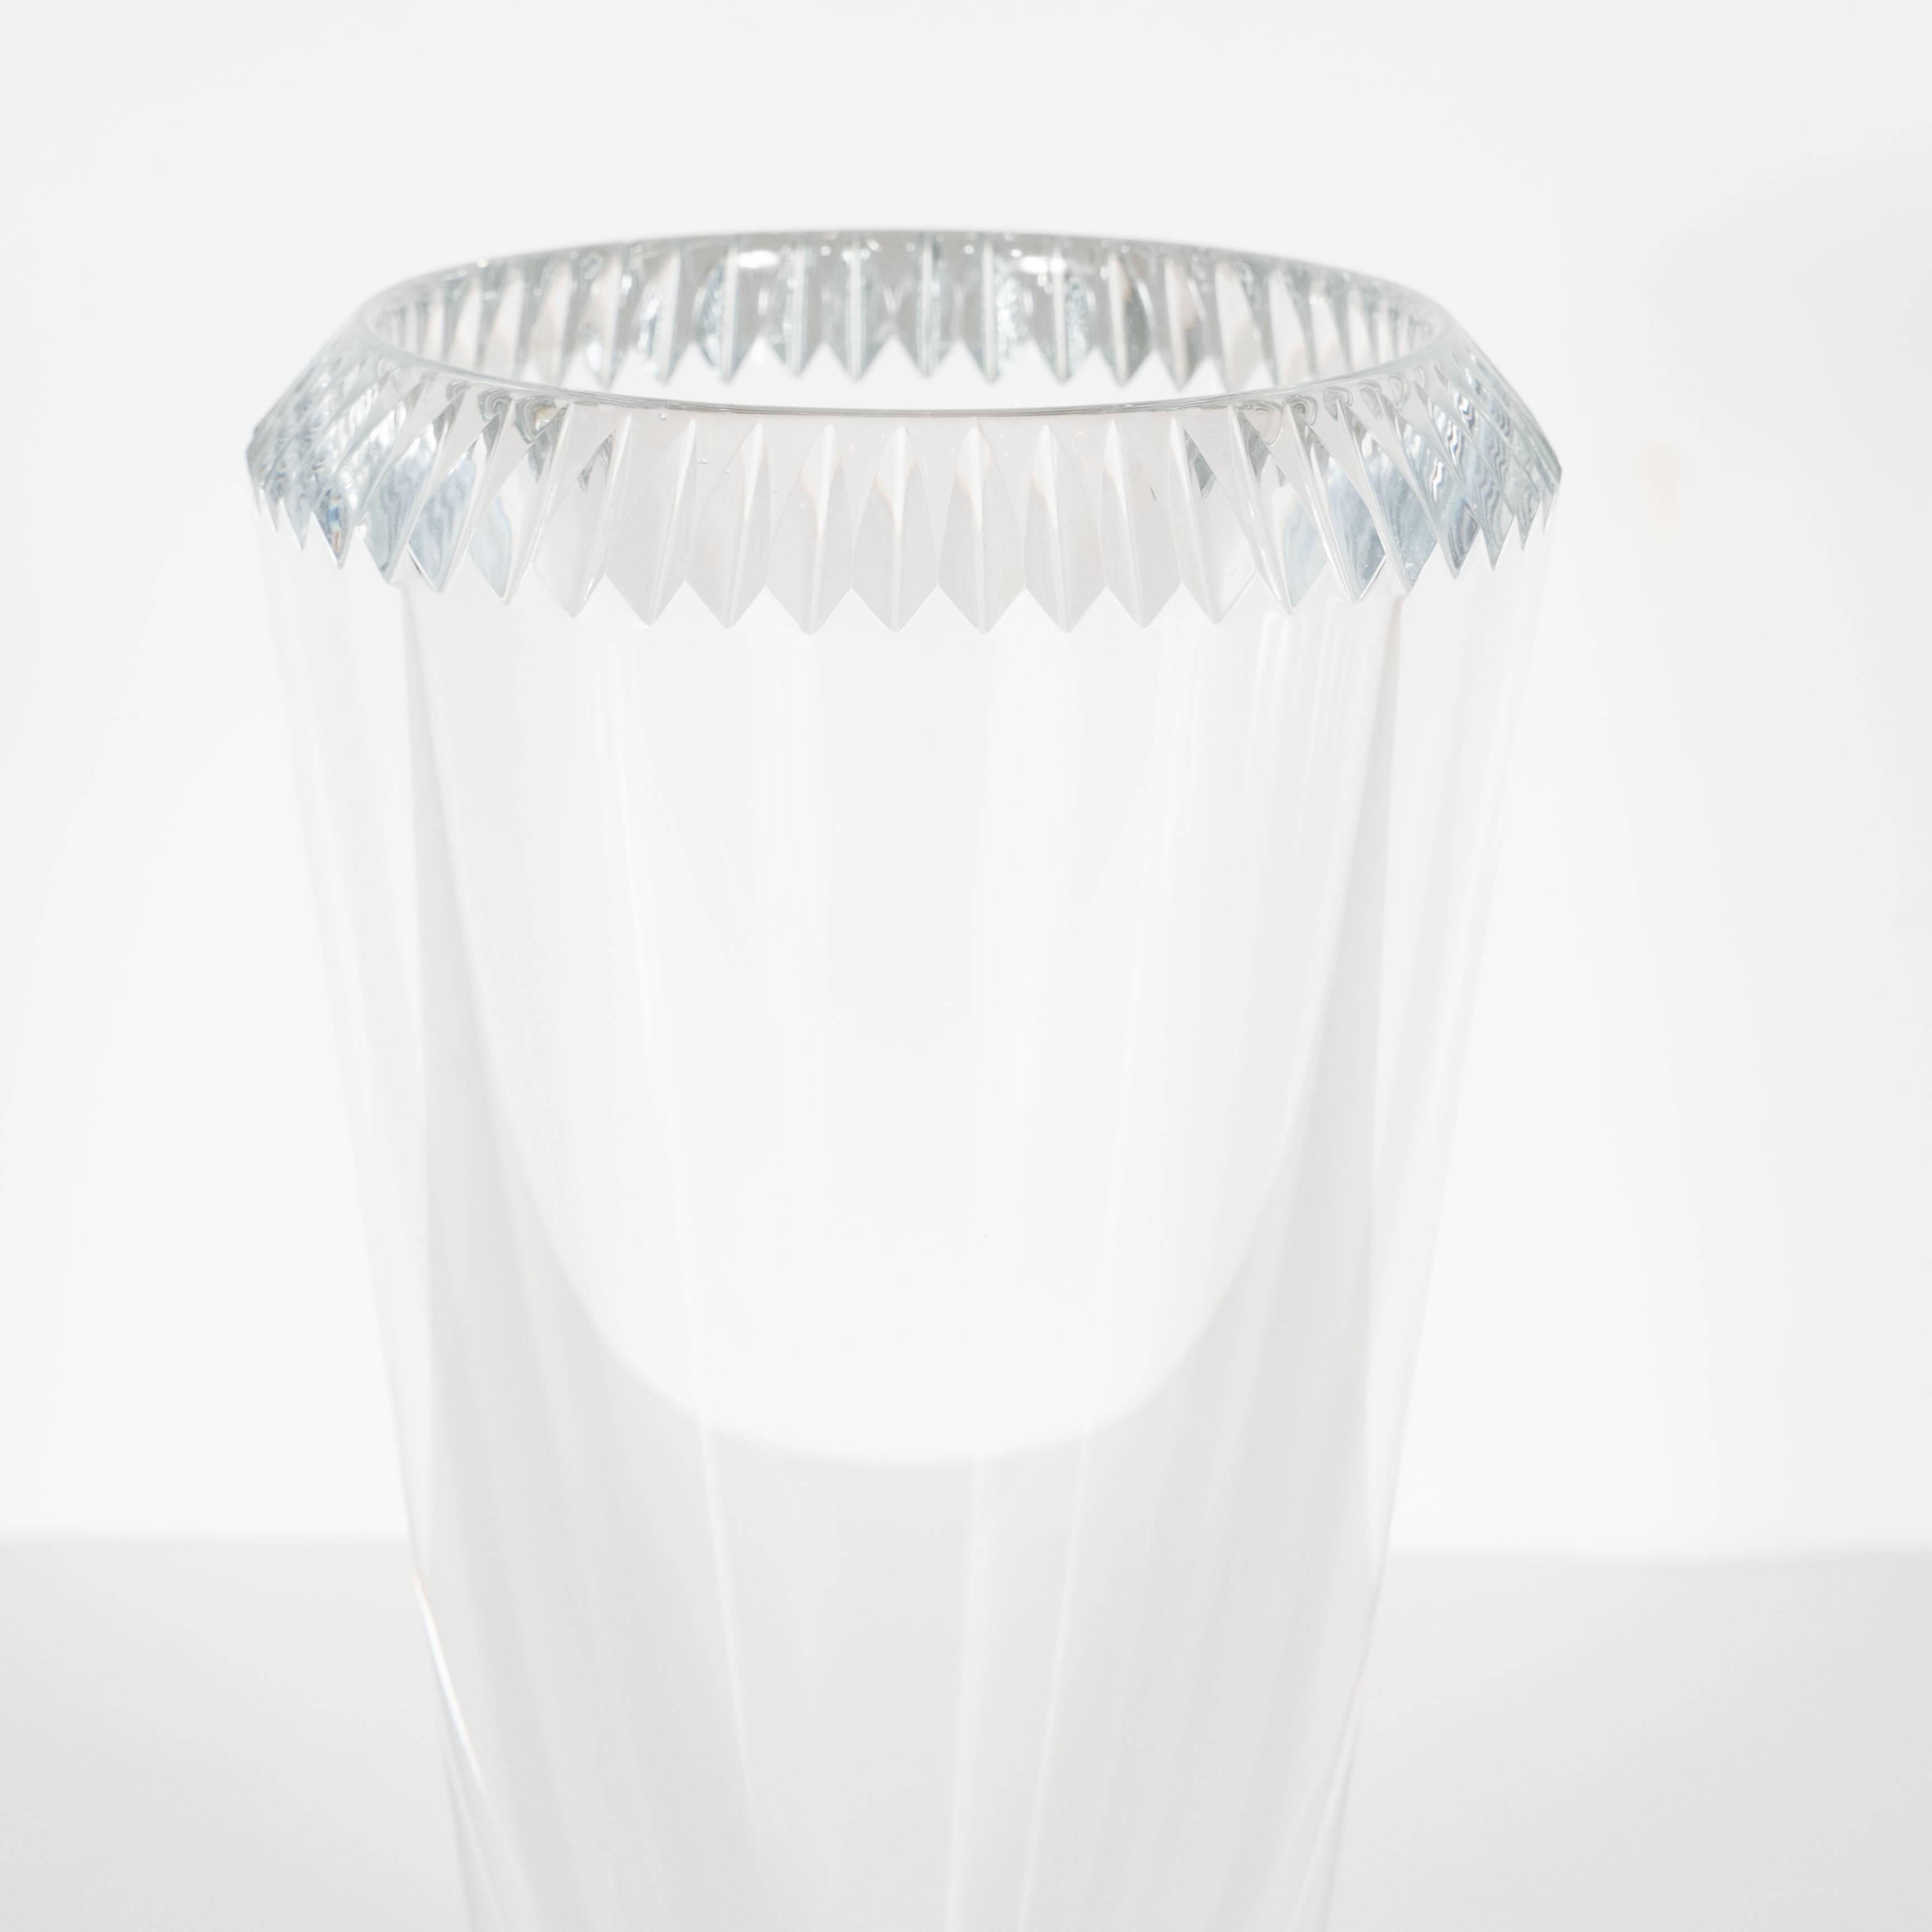 This gorgeous vase features a clean modern design with a border on top of diamond cut detailing in a great geometric pattern. This piece is a great accent as well as functional piece which will add a touch of sparkle to any decor. This bears the